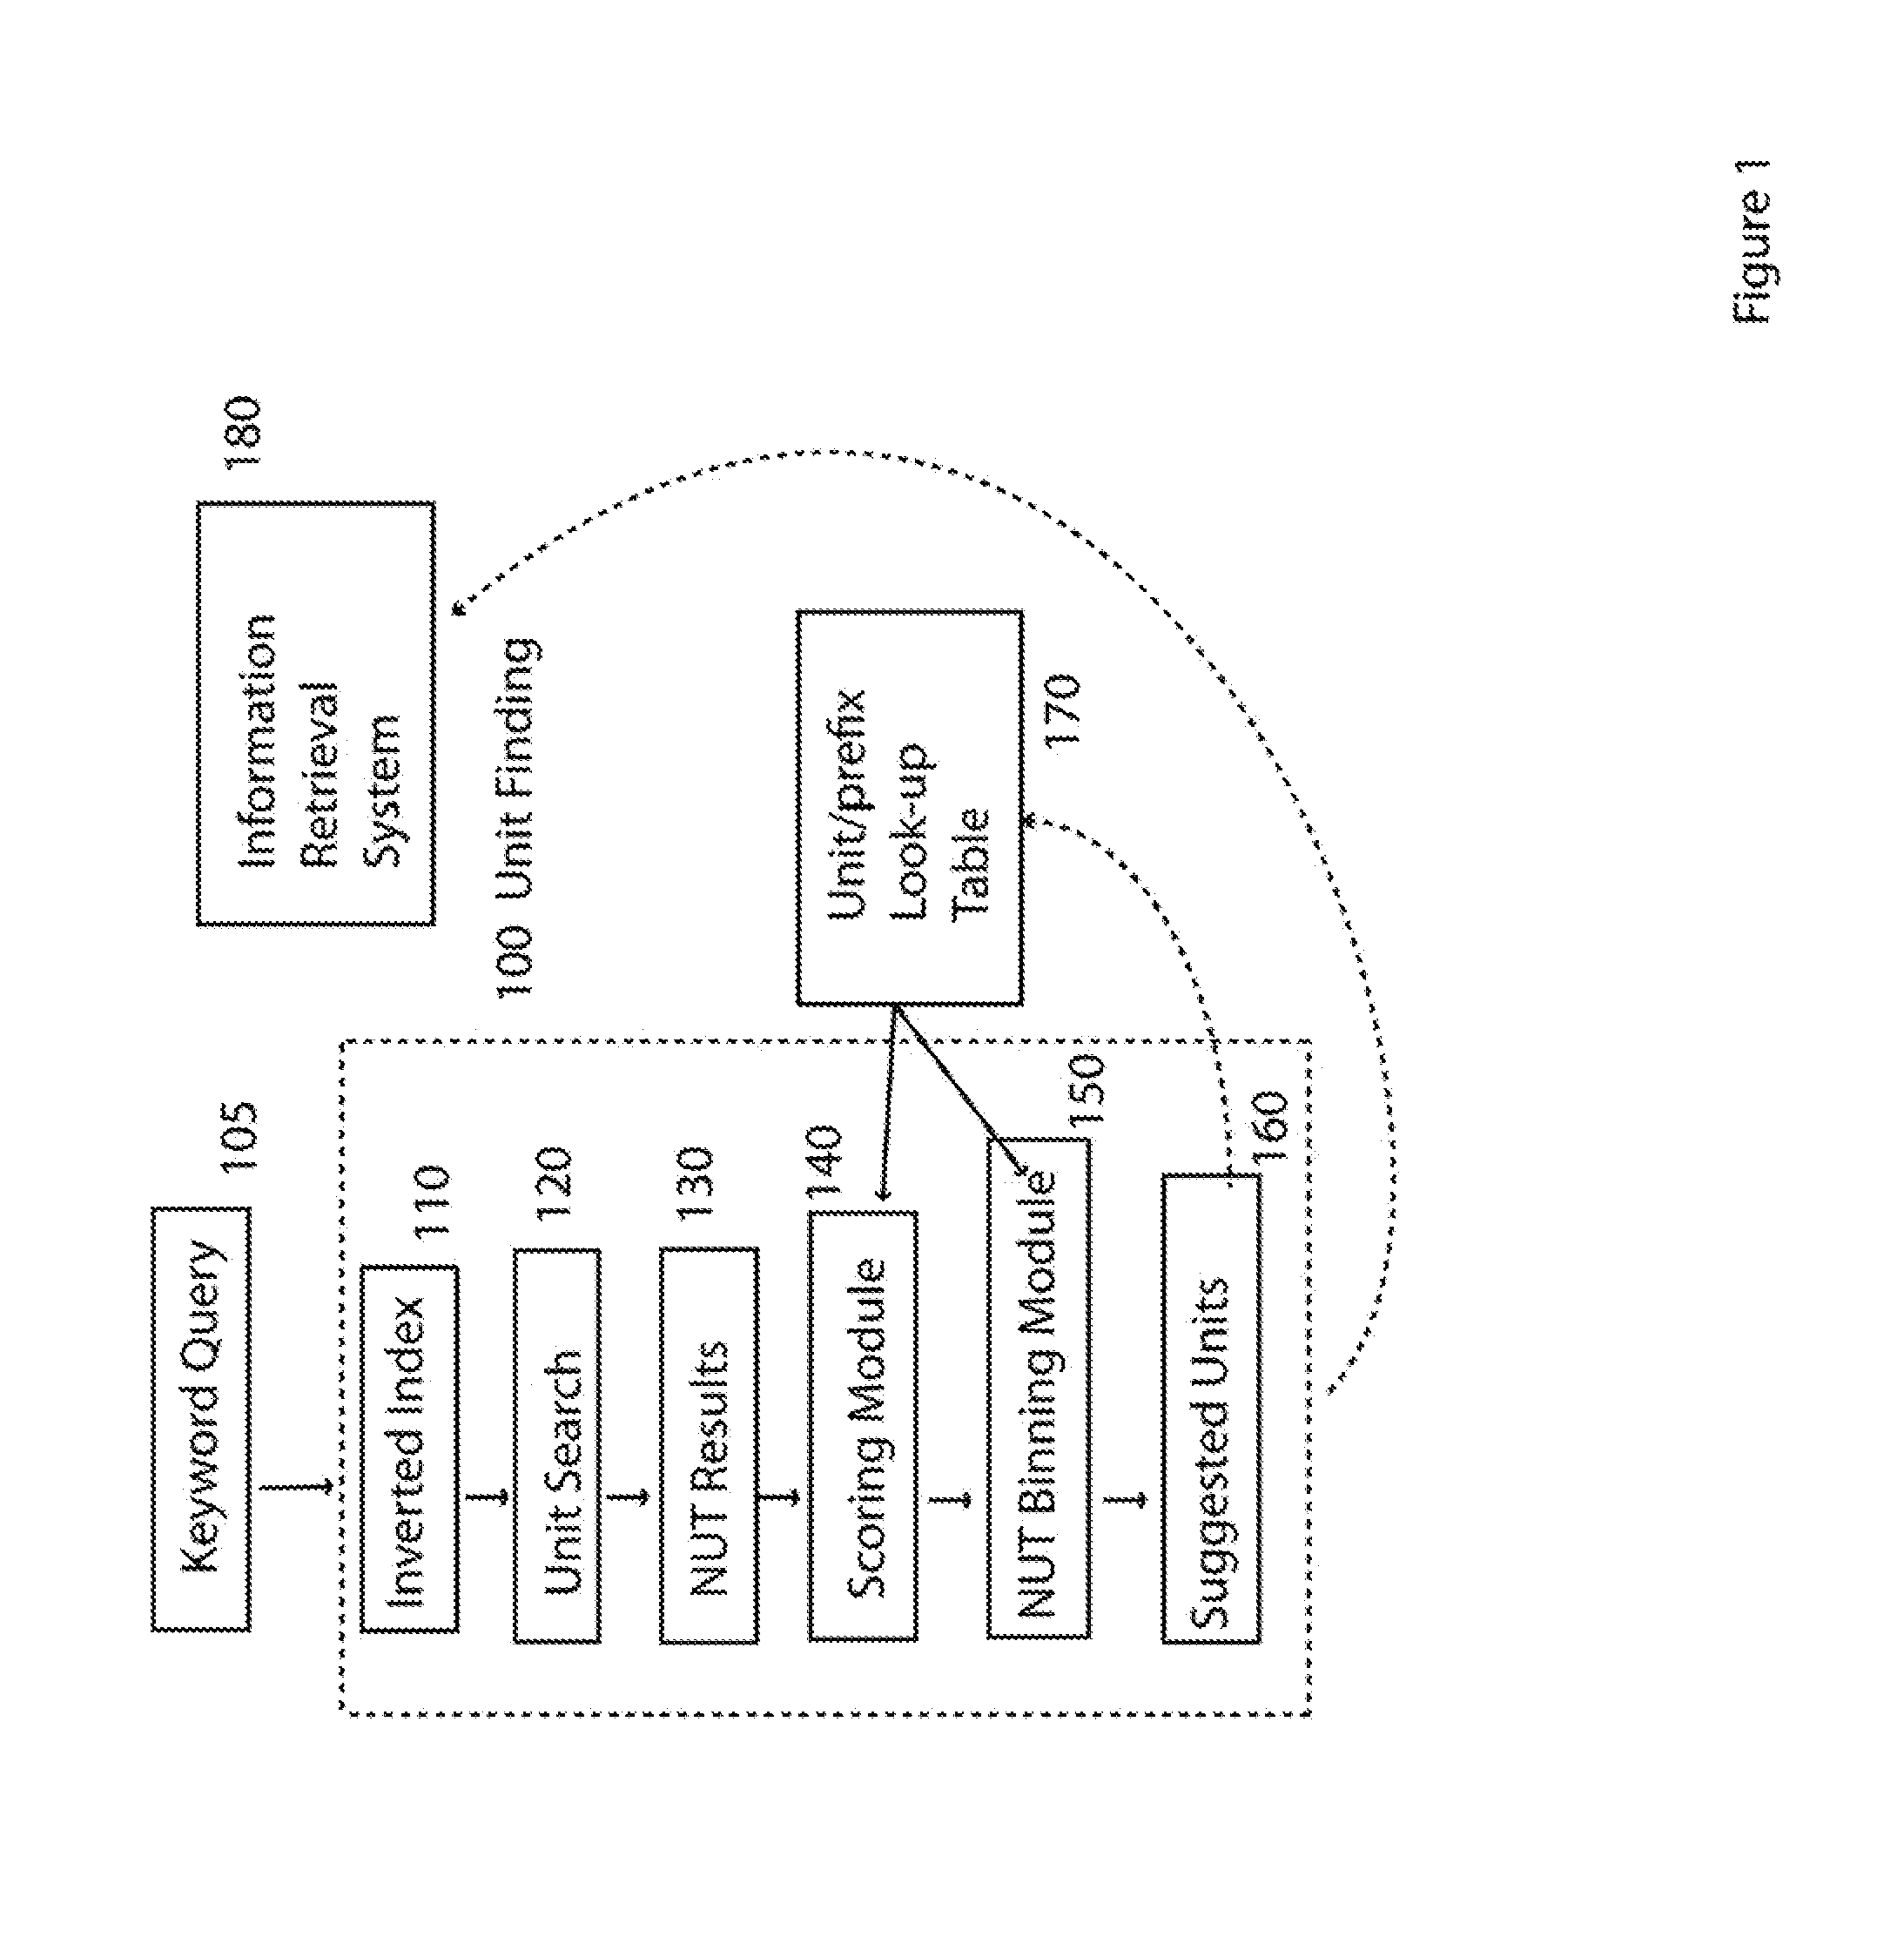 Automated unit finding for numeric information retrieval